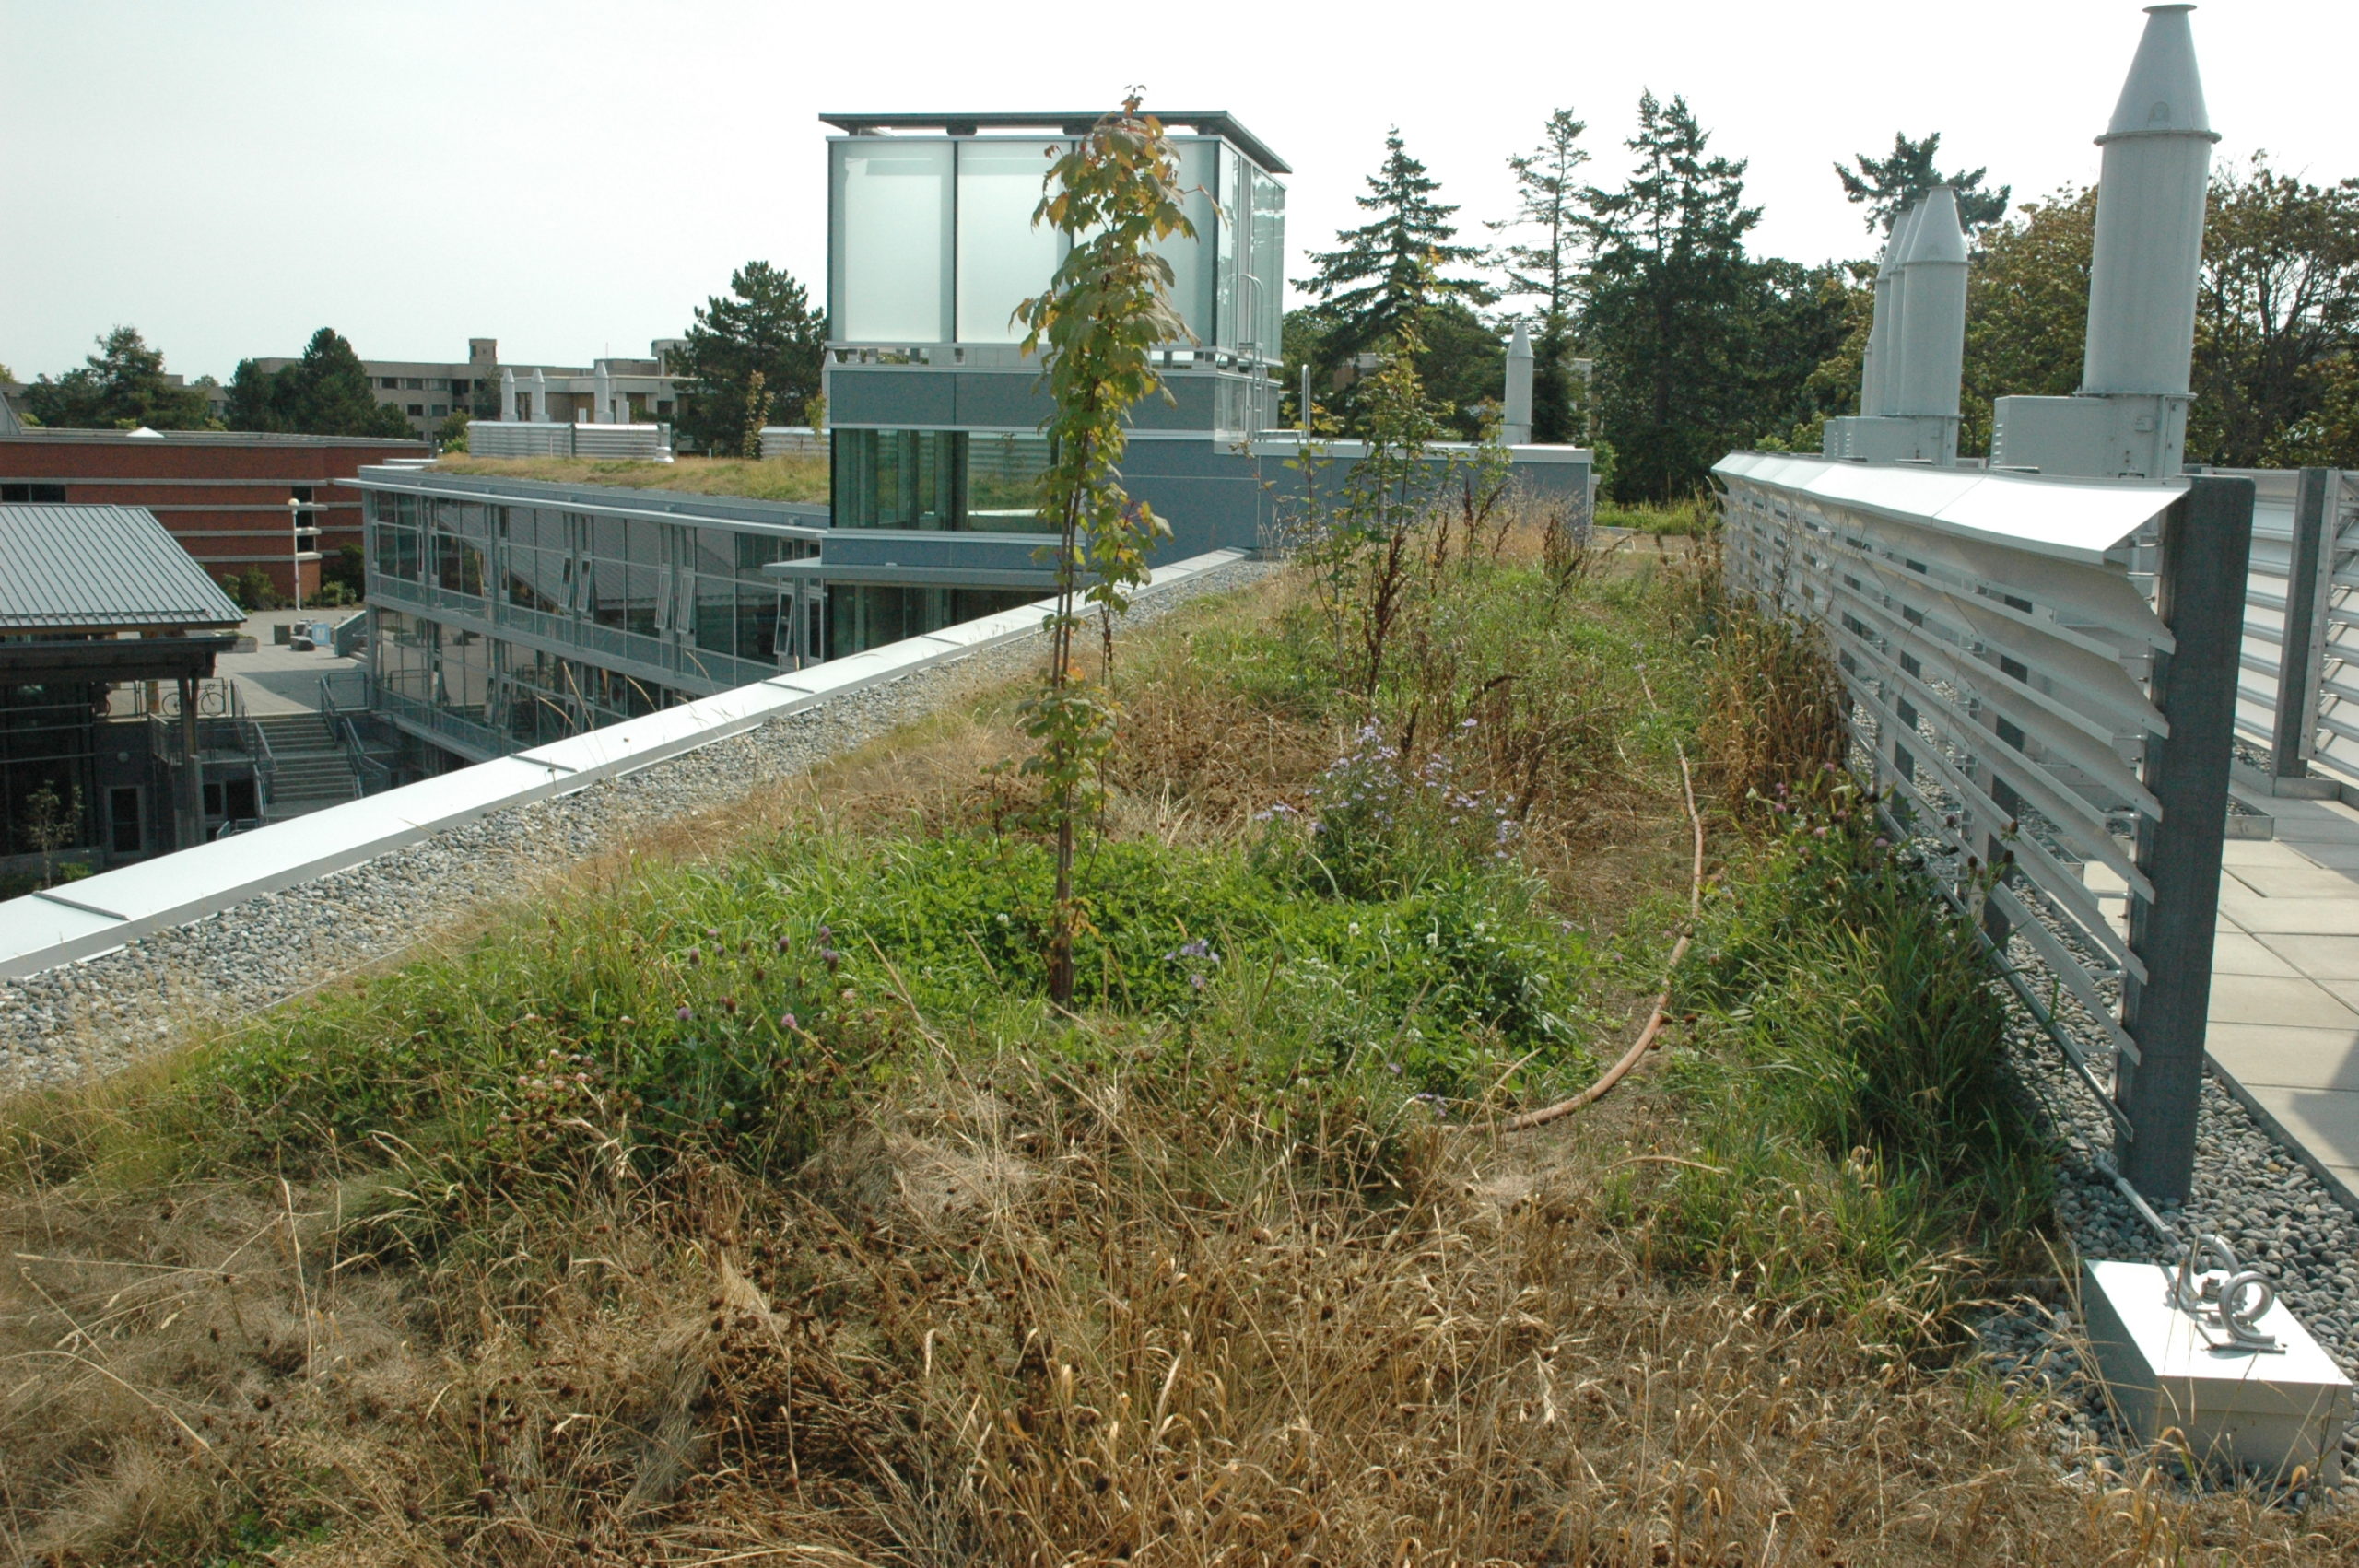 Students attempt to convert David Turpin Building’s green roof into growing space